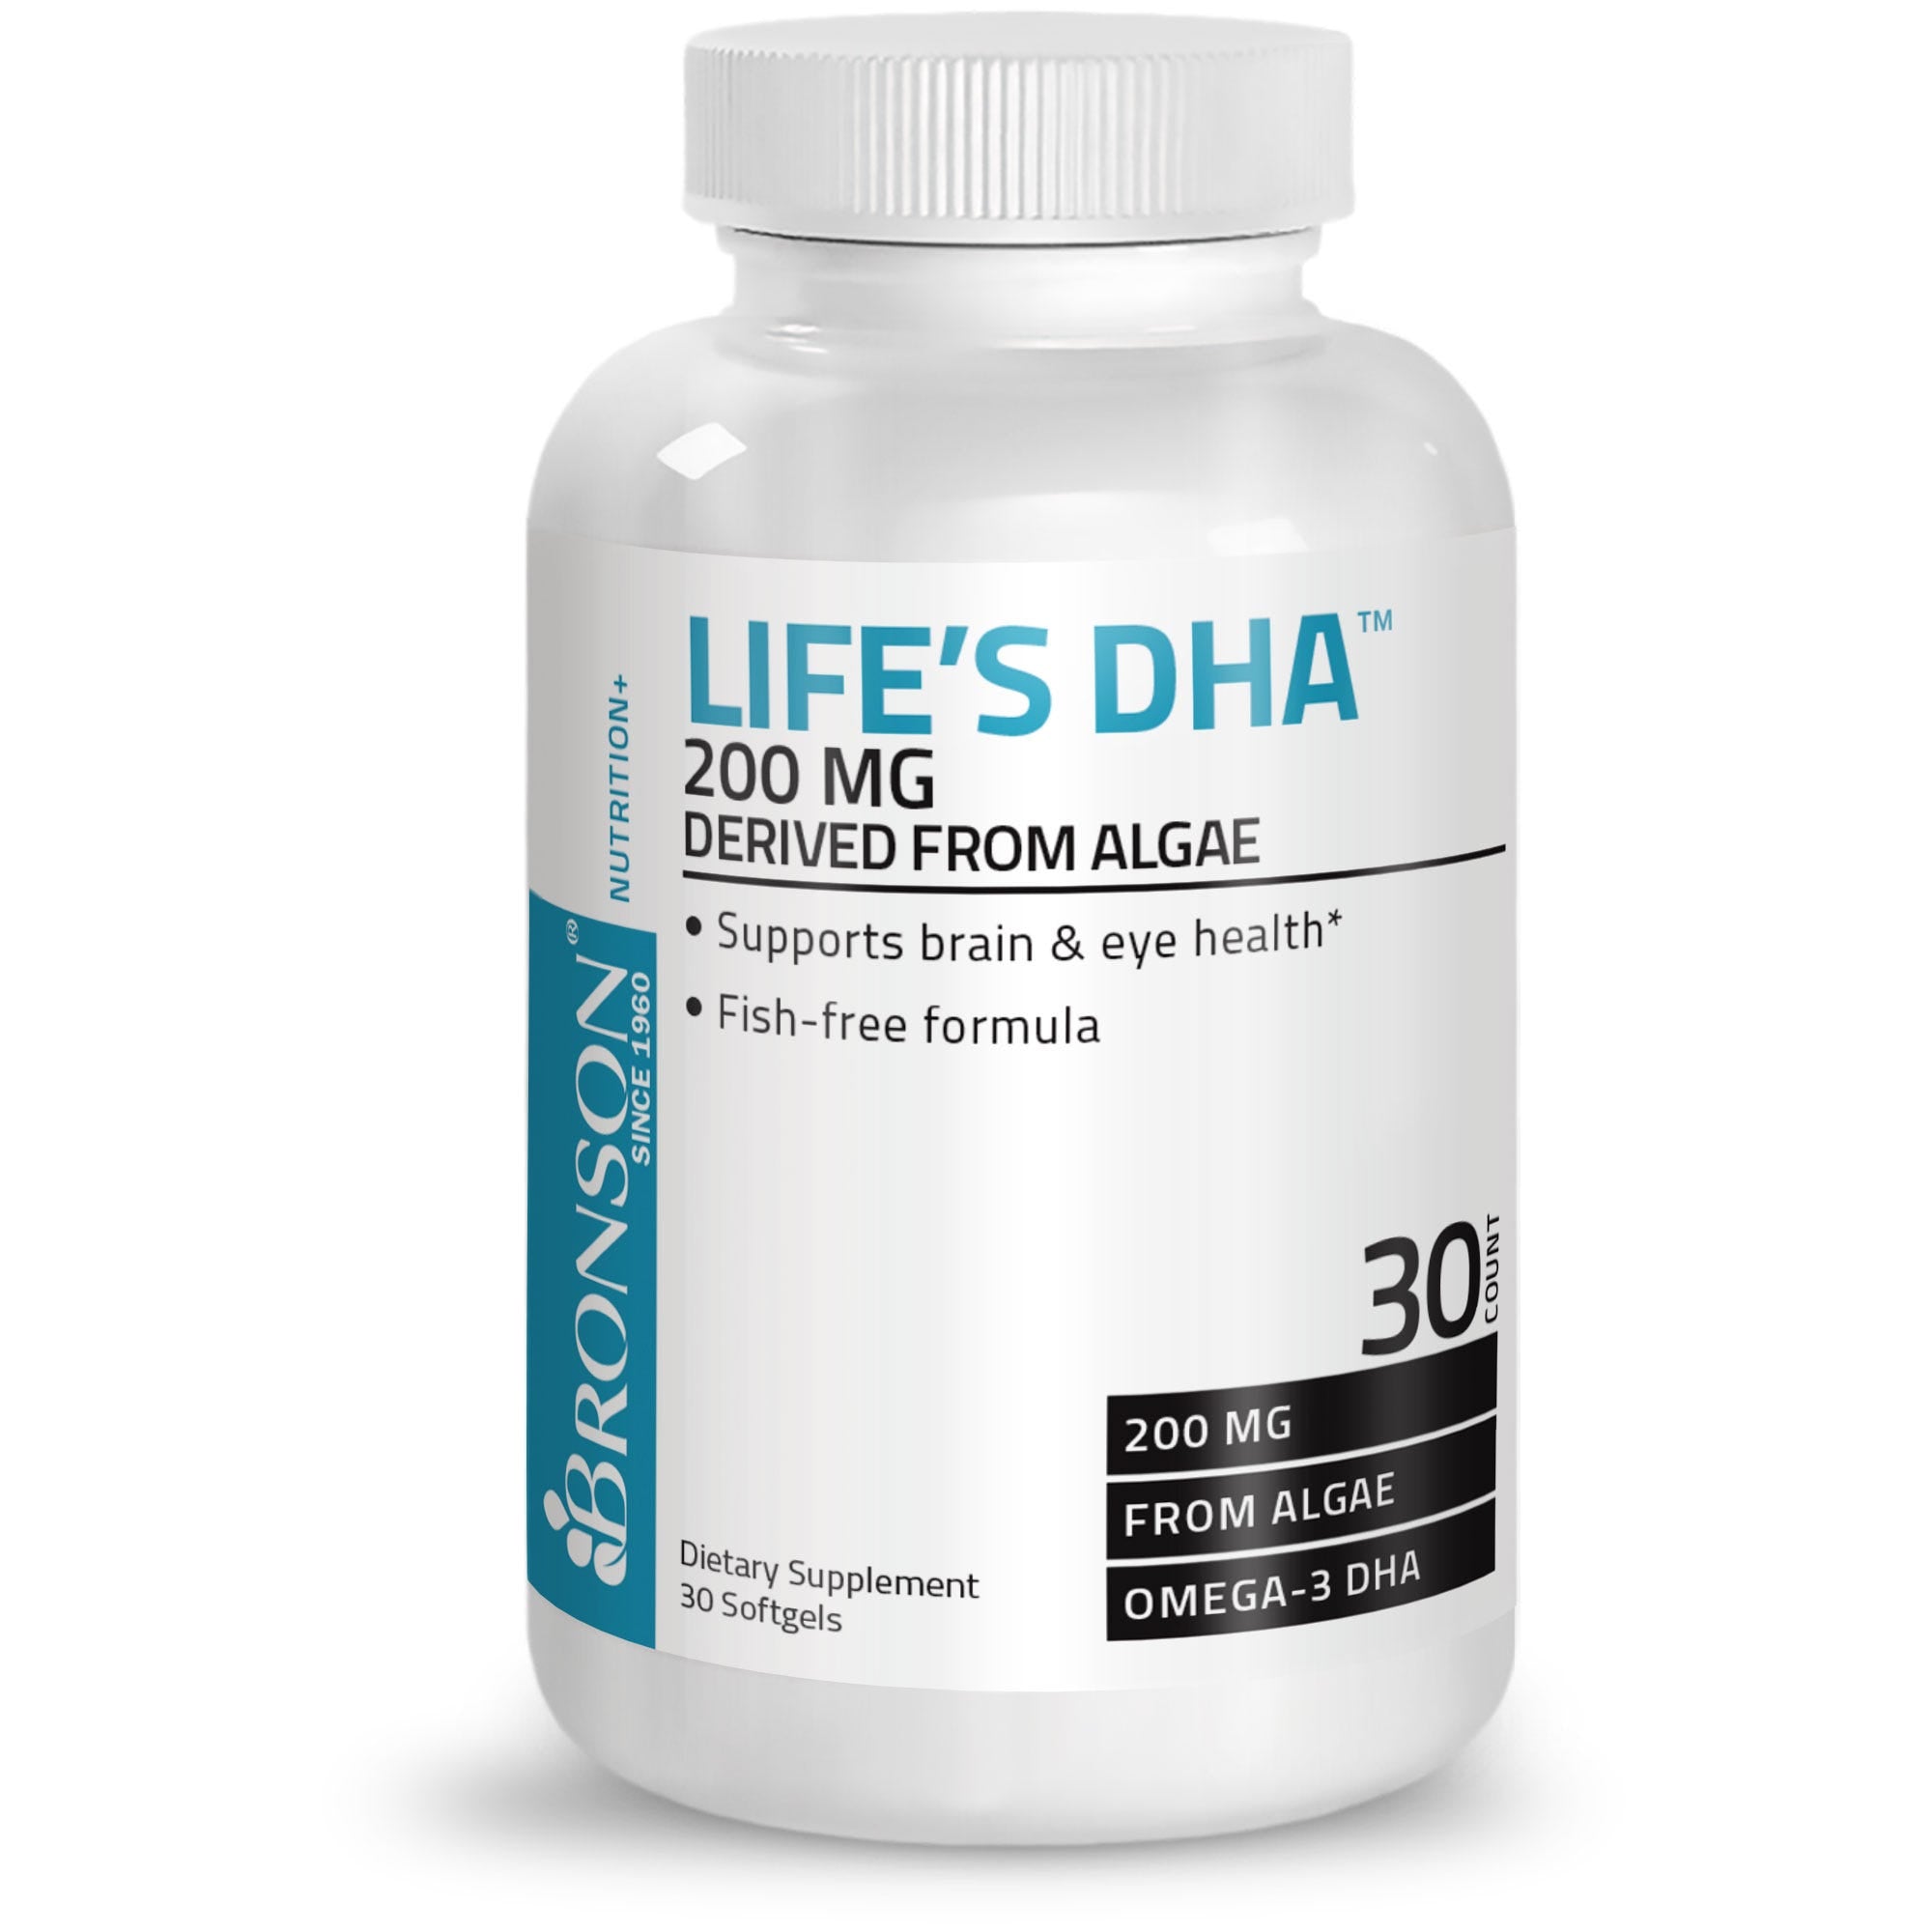 Life's DHA™ Vegetarian Derived from Algae - 200 mg - 30 Softgels view 2 of 6